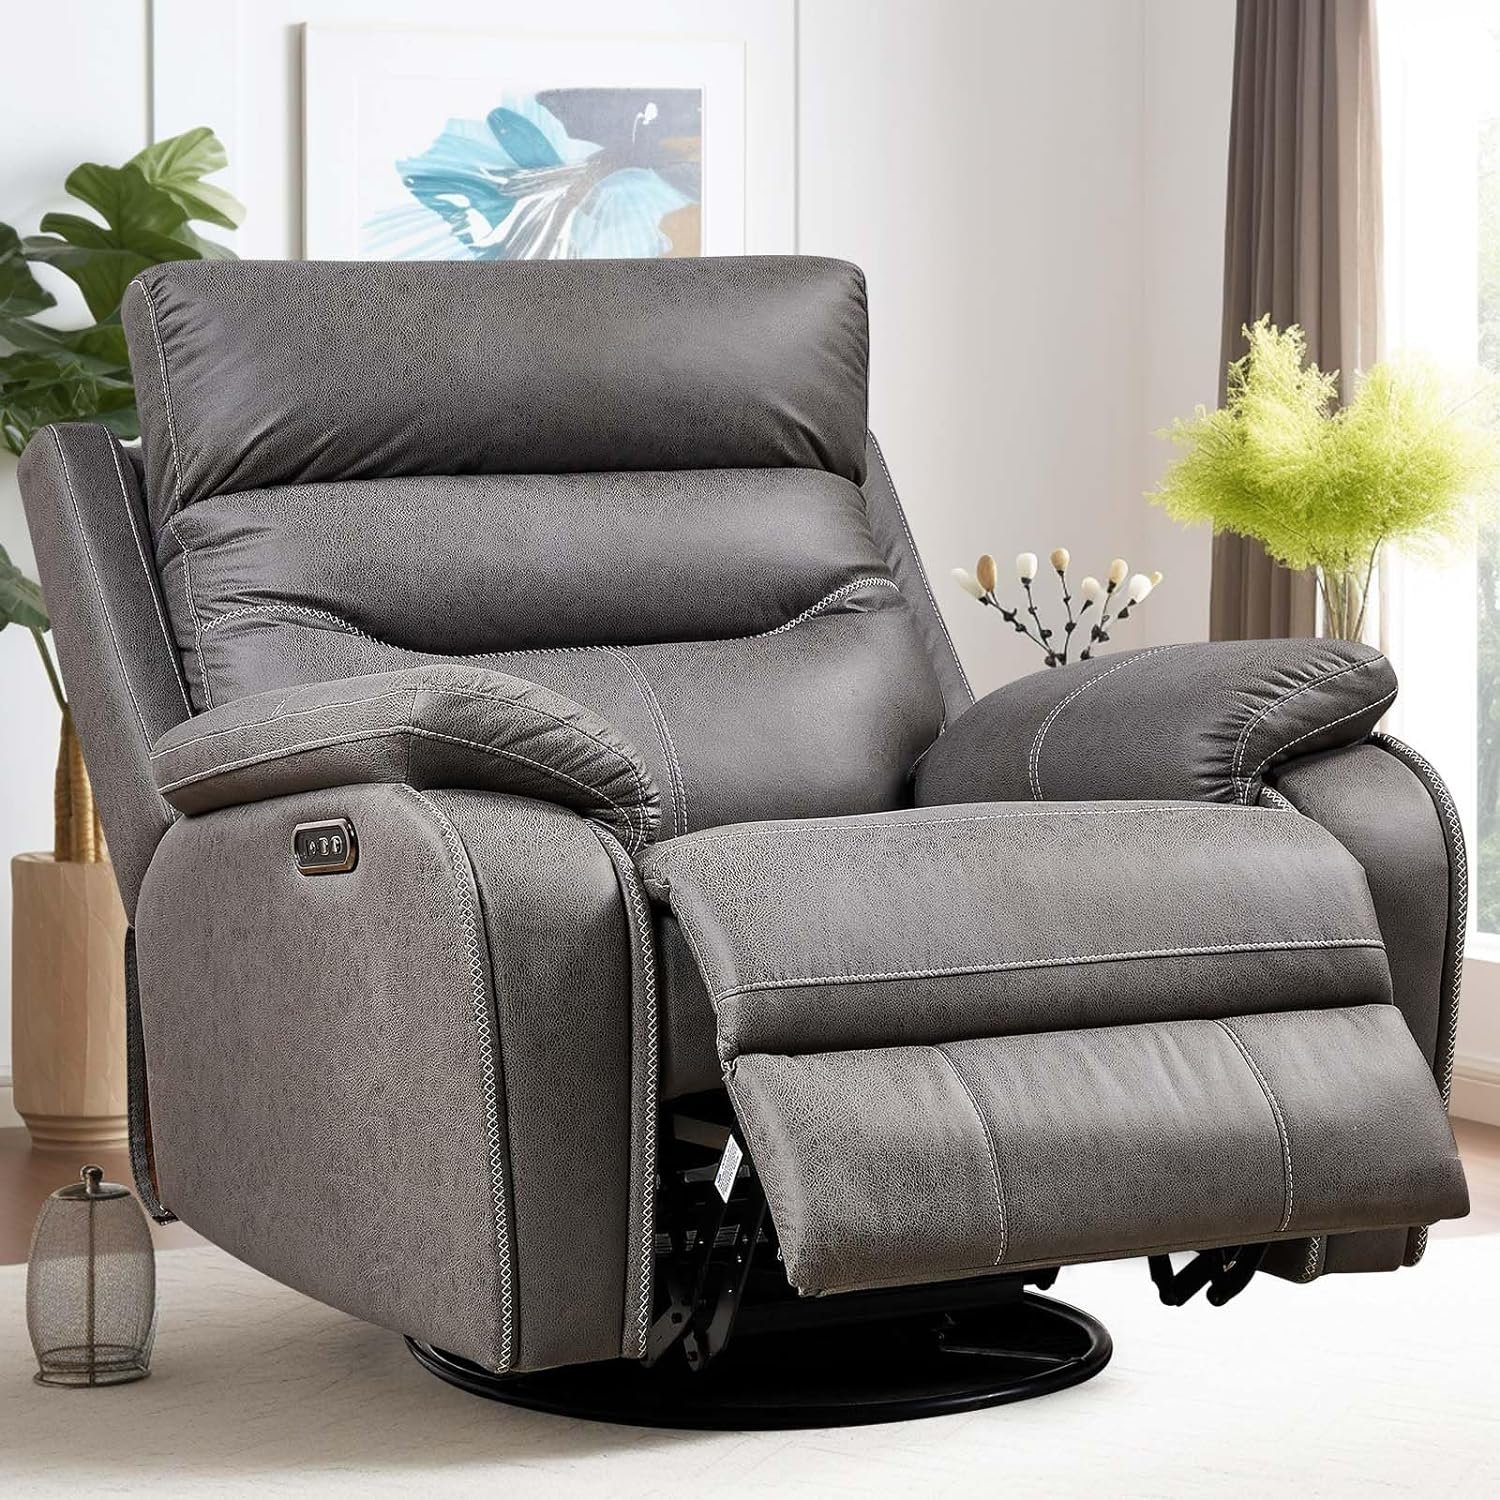 Lyromix Power Swivel Nursery Glider Recliner Chair, Electric Rocking Sofa with Adjustable Headrest  Soft Cushions, Ultimate Comfort Living Room Bedroom Rocker Armchairs, Built-in USB, Gray